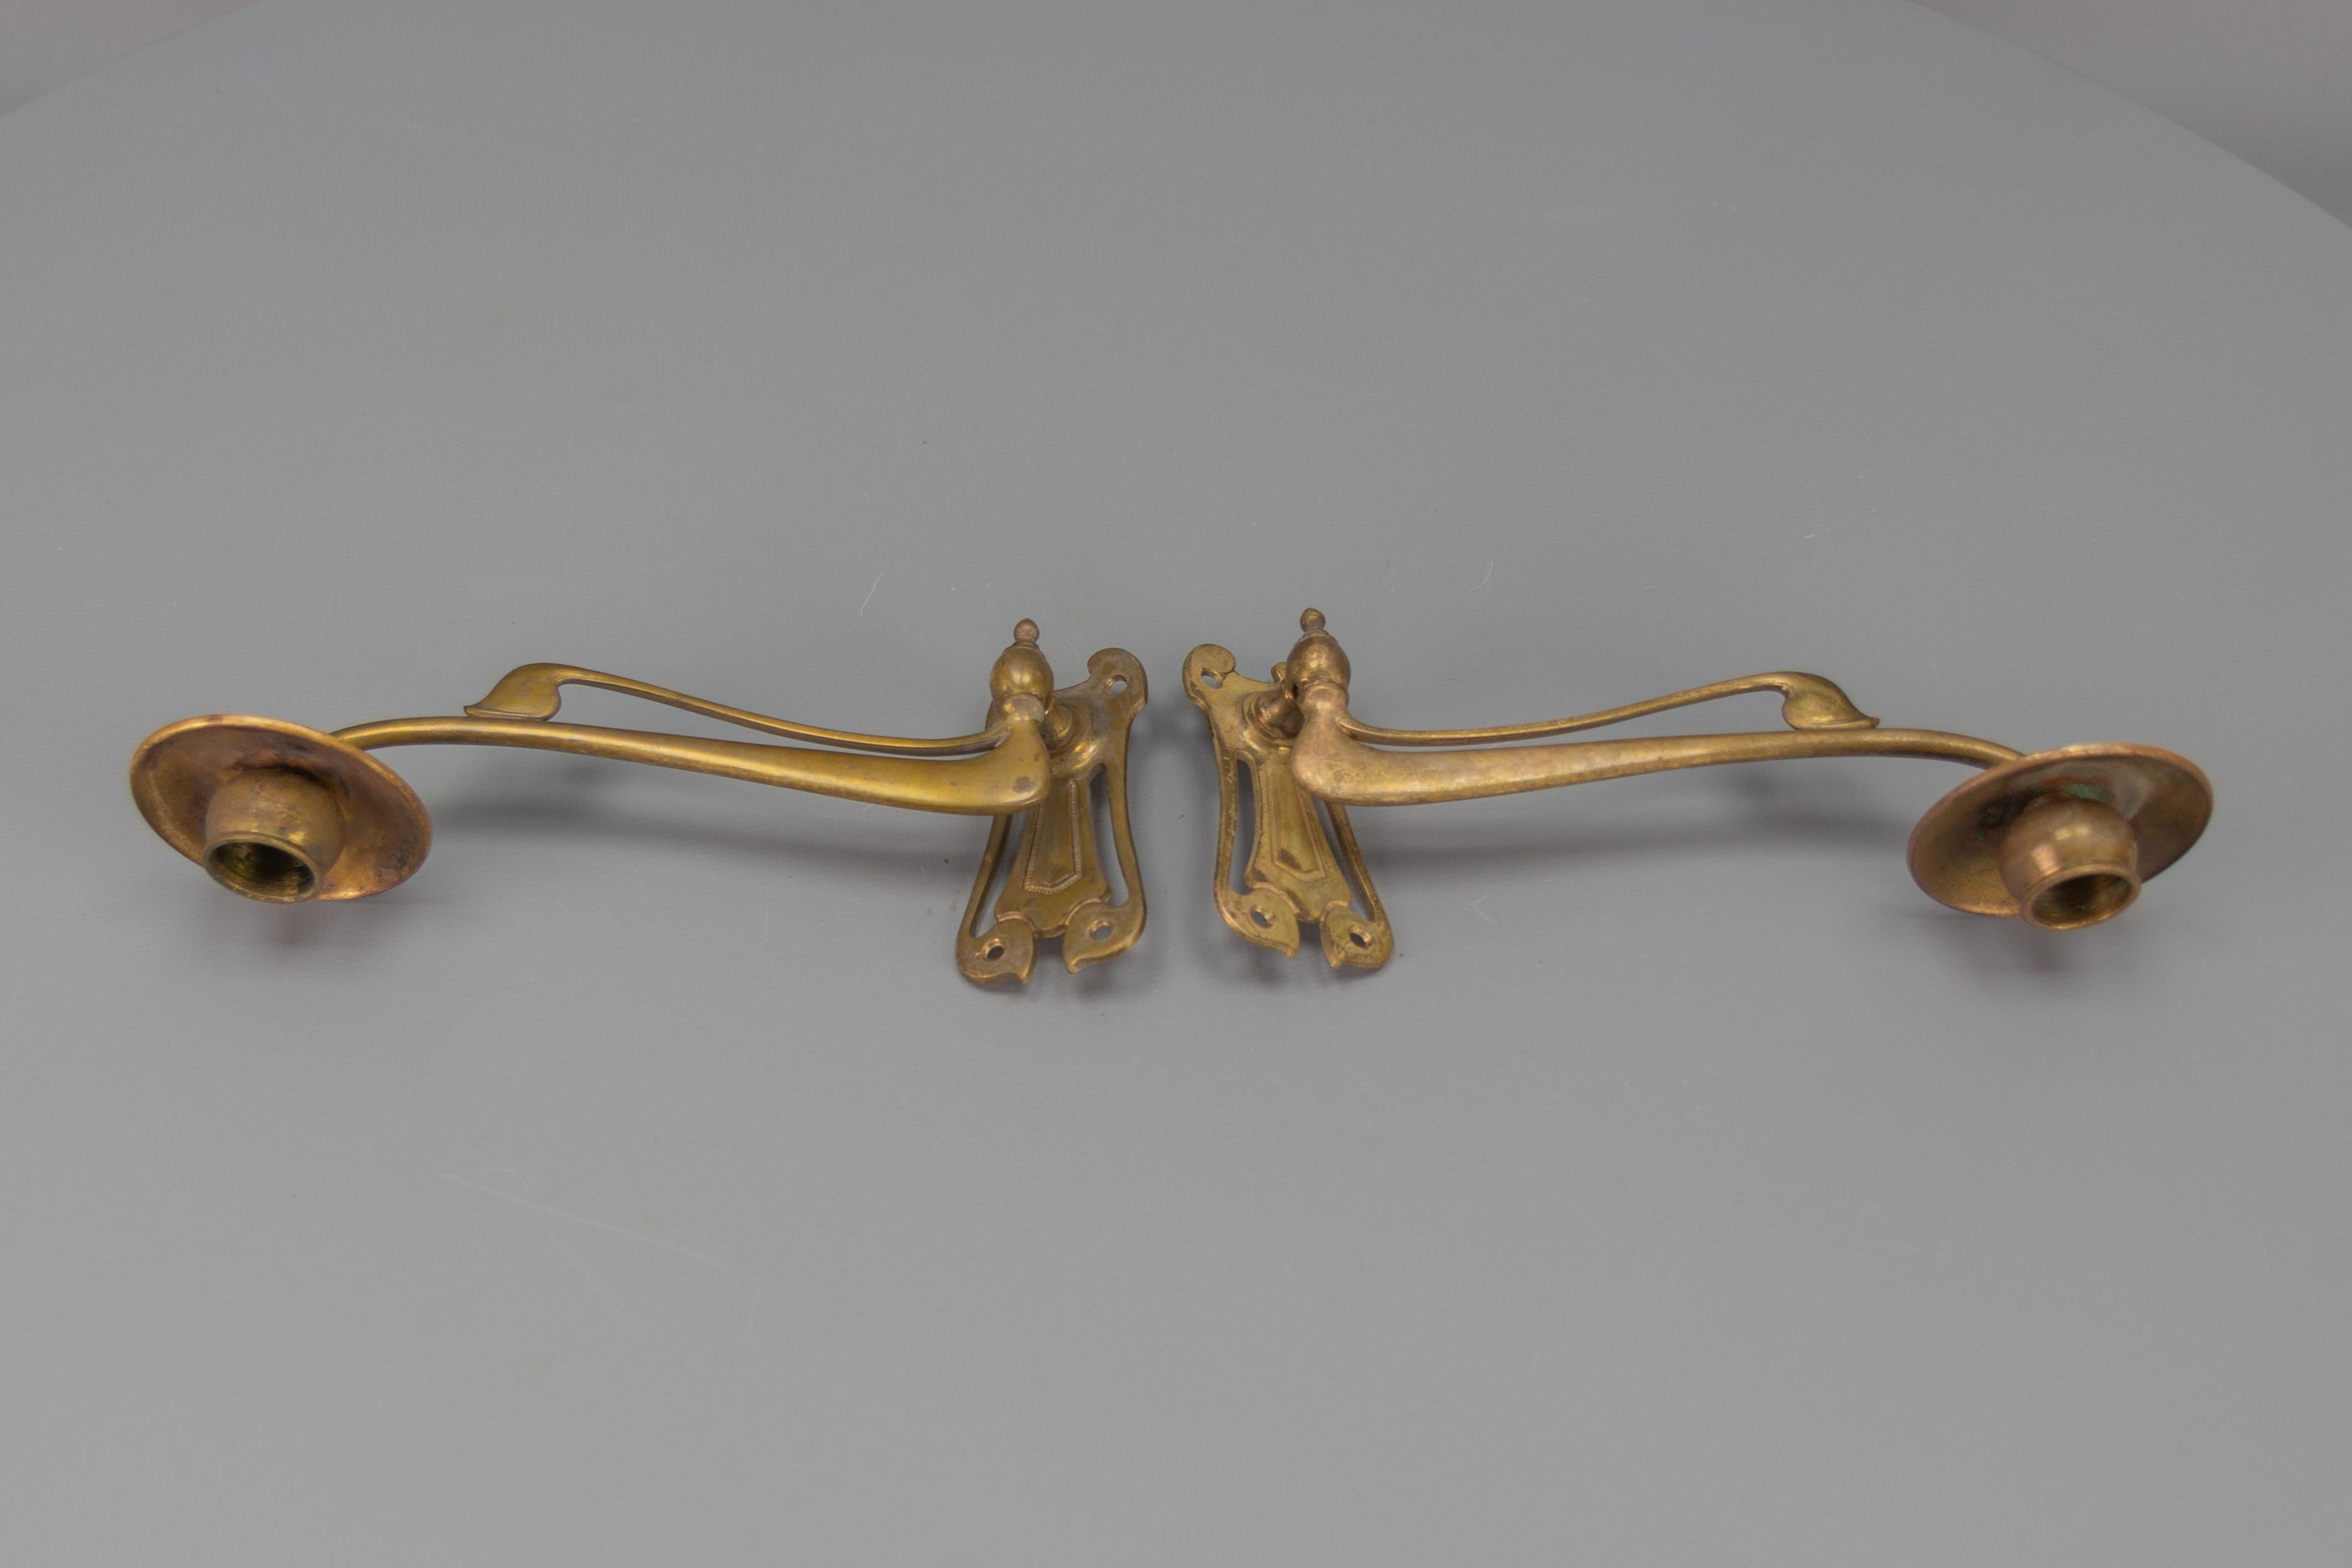 Pair of French Art Nouveau Brass Piano Wall Sconces Swivel Candle Holders, 1920 For Sale 1